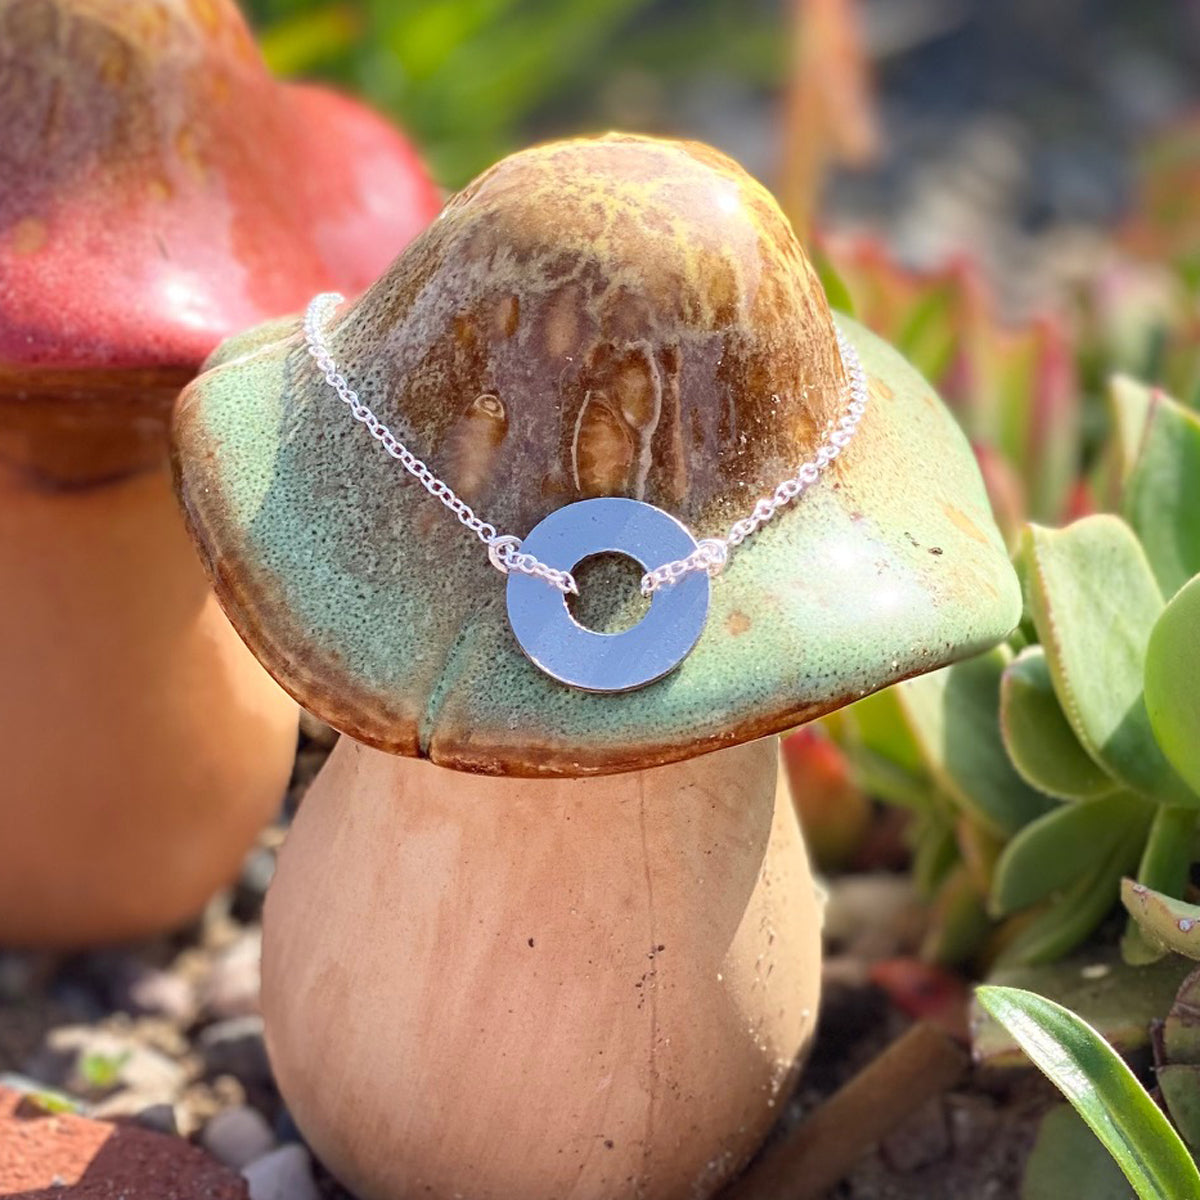 Earth Love - Zero Waste Necklace for Conscious Eco Living with Upcycled Scuba Gear washer.  Influenced by those artists and organizations that up-recycle fishing nets into bathing suits from ocean trash. Eco-conscious jewelry for the ocean lovers, surfers, scuba divers.